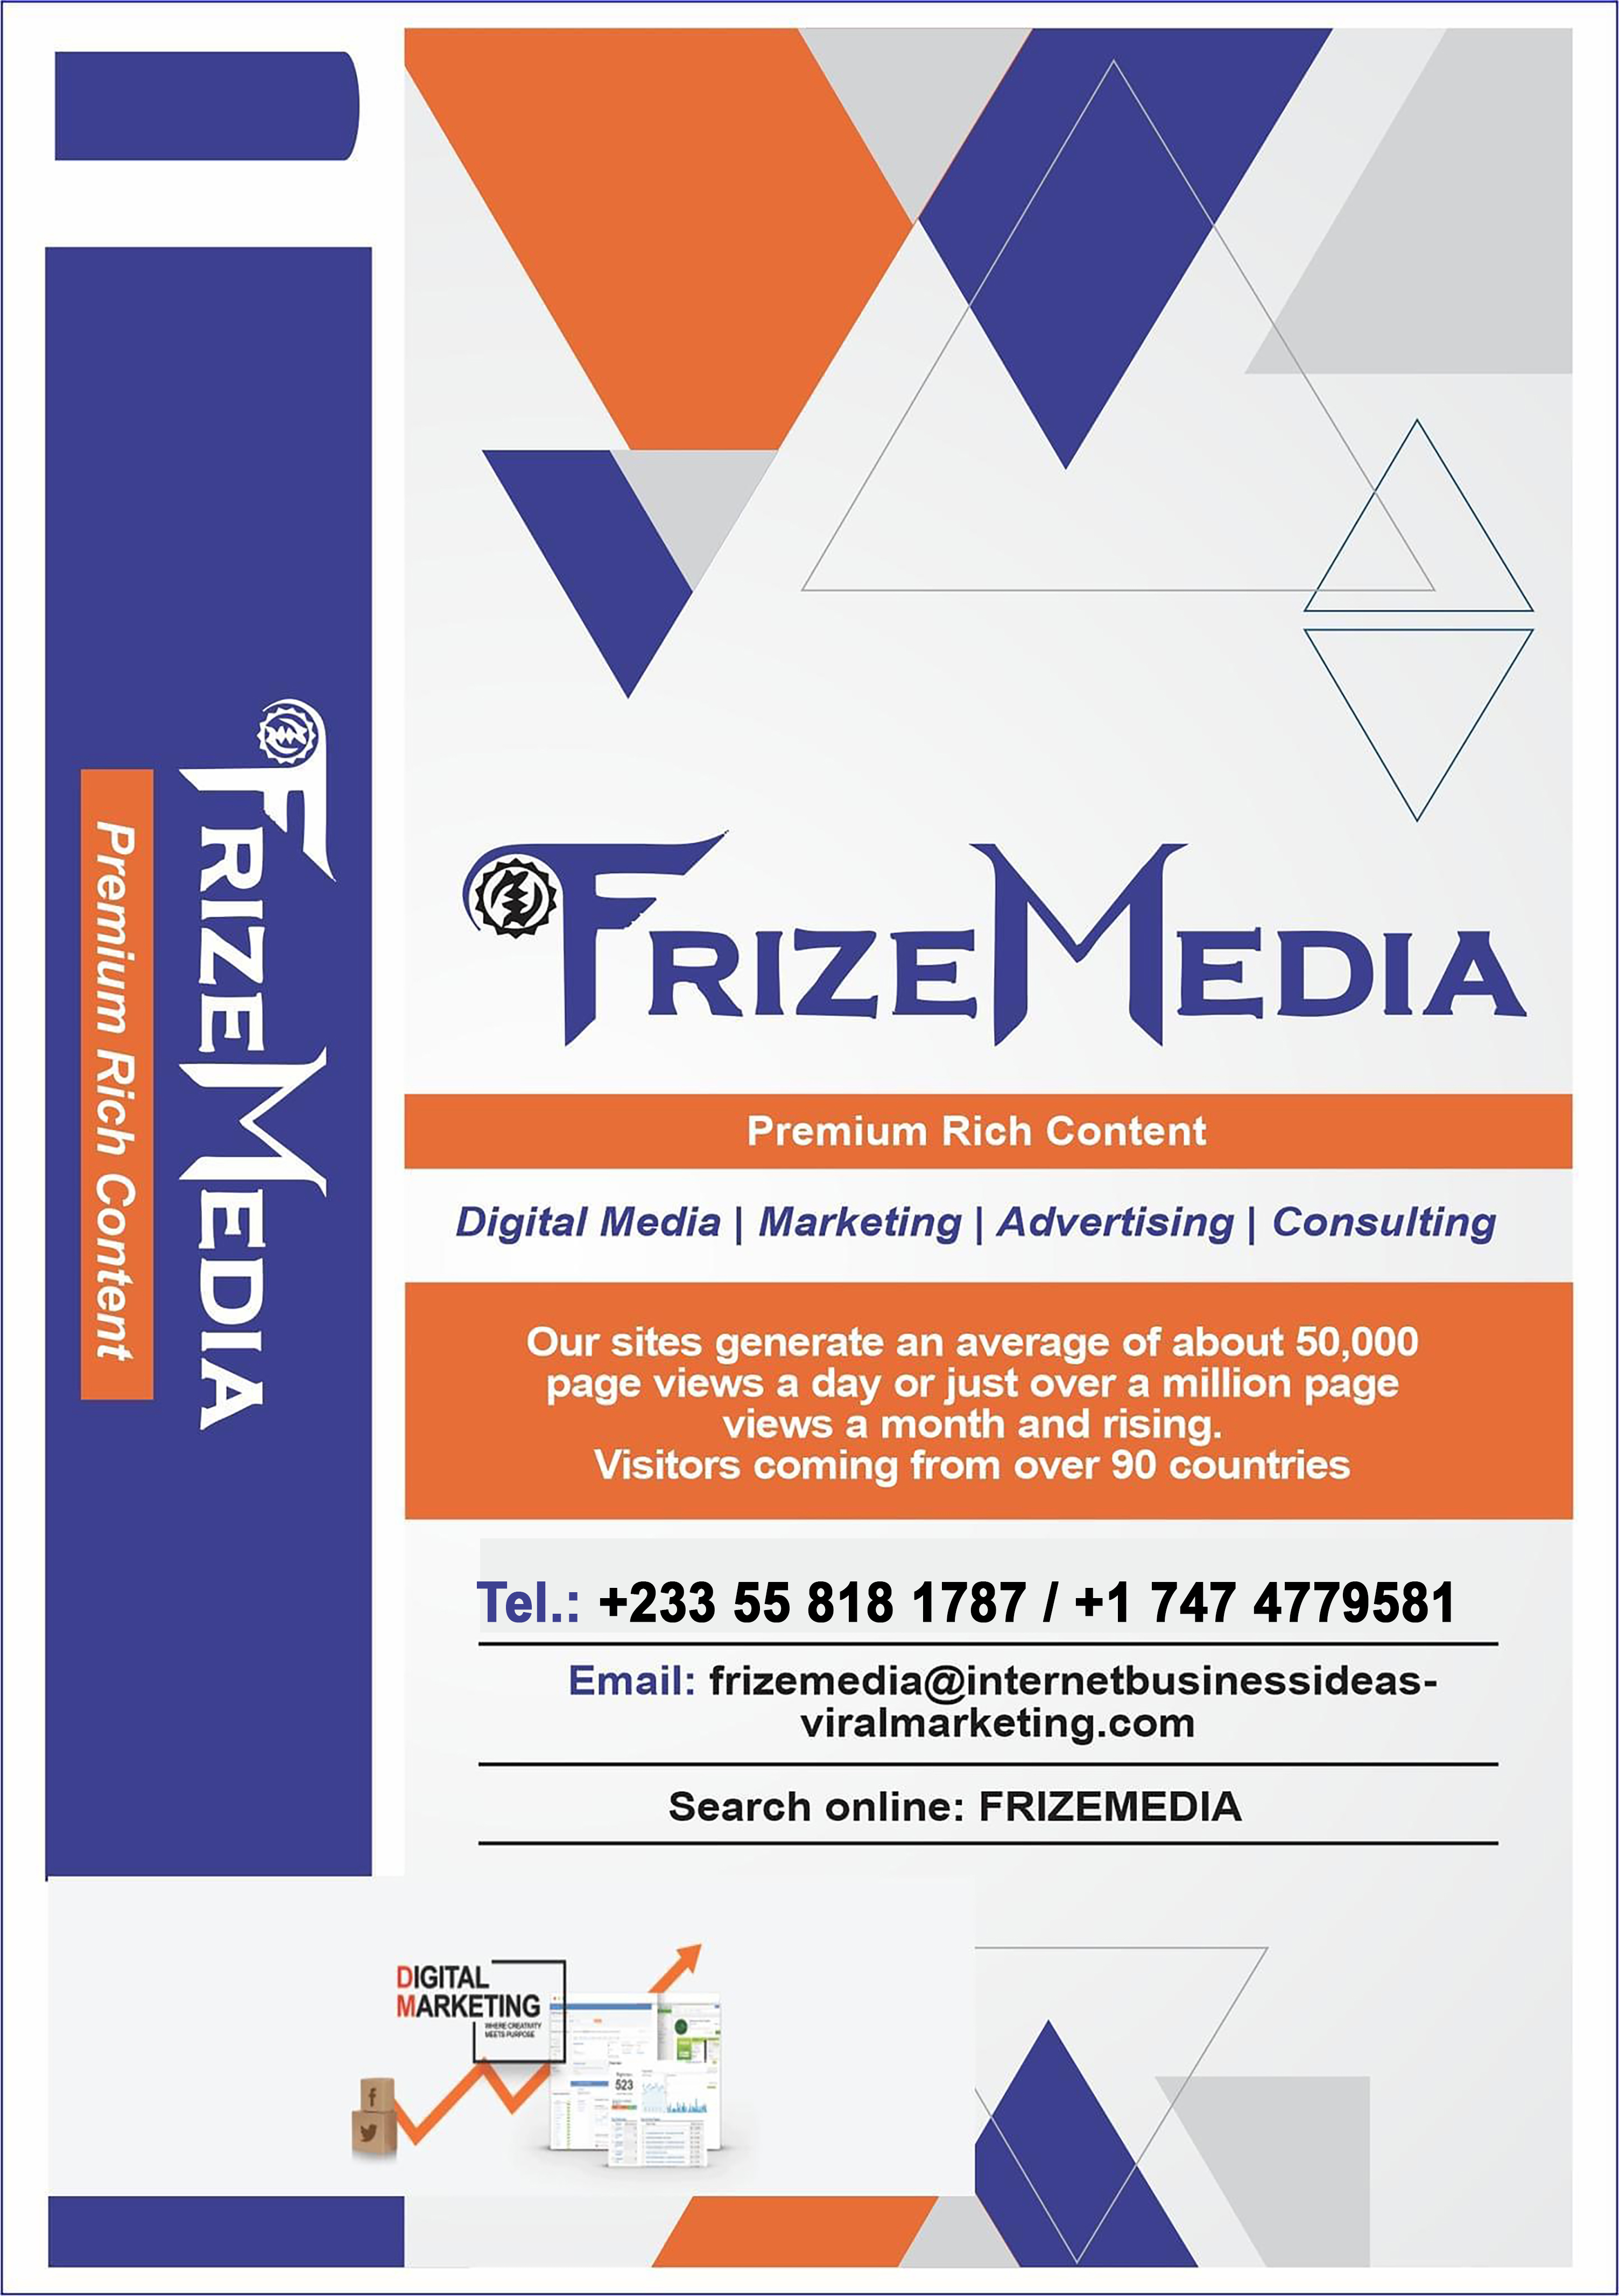 FrizeMedia offers your business deeper links based on objectives, and boosting your content across devices.Call Whatsapp +1 747 4779581 #DigitalMarketing #Onlineadvertising